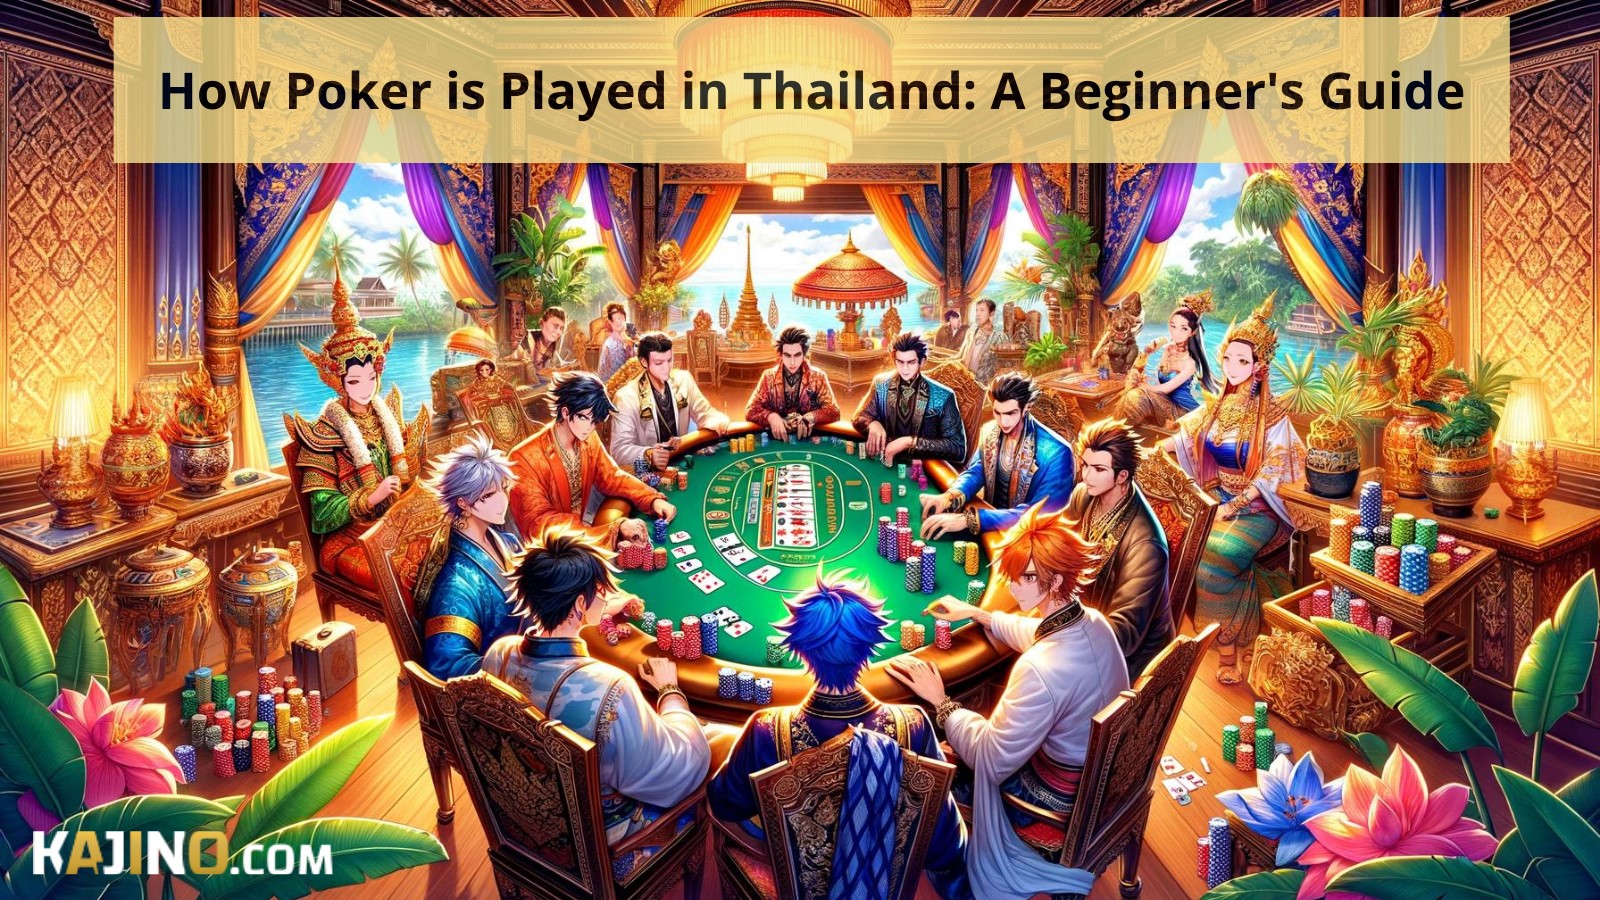 How Poker is Played in Thailand: A Beginner's Guide